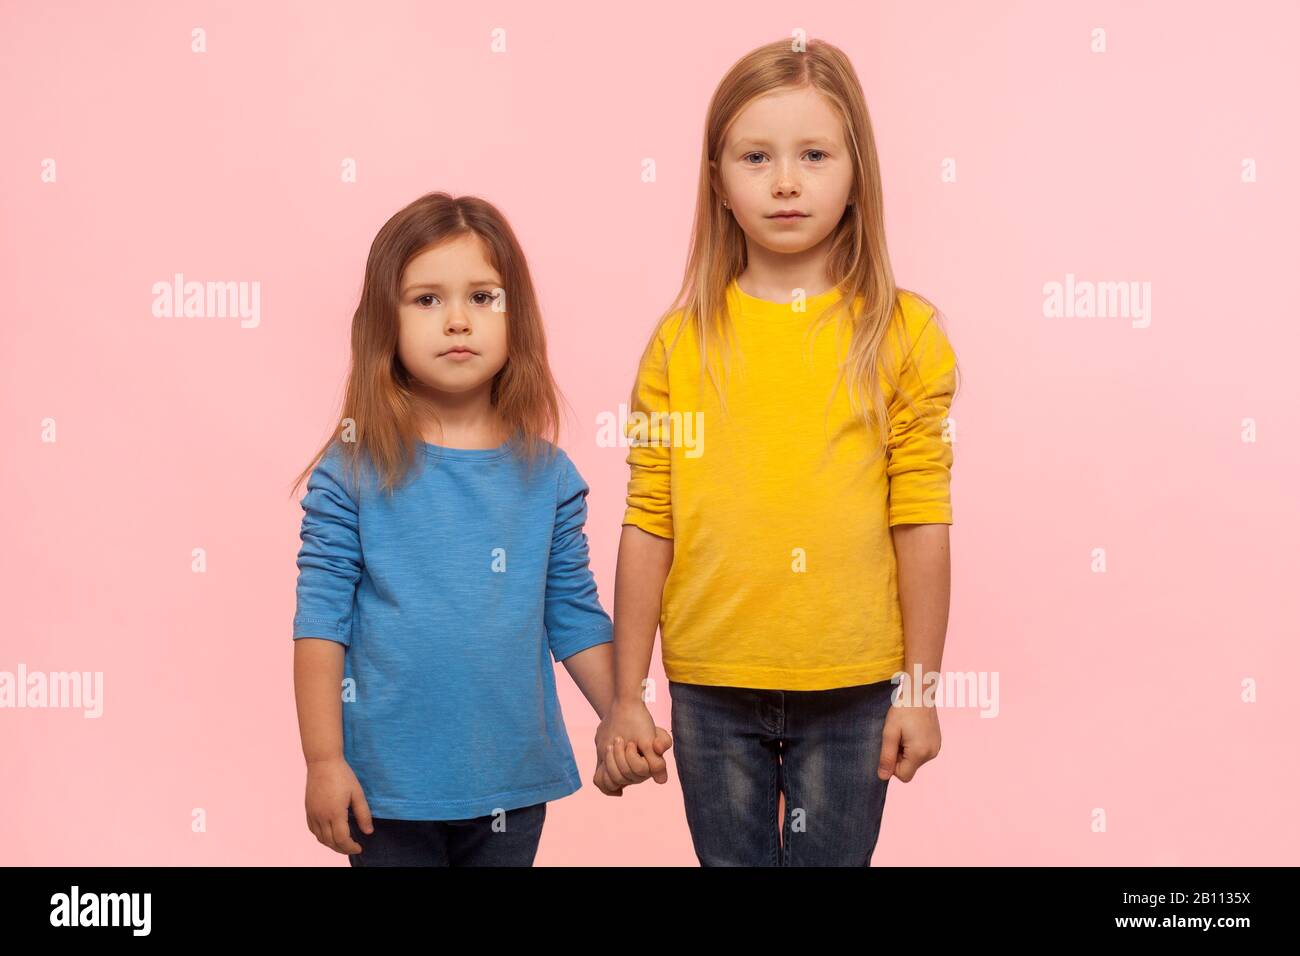 Little friends. Two cute charming preschool girls in sweatshirts standing together, holding hands and looking at camera with serious calm expression. Stock Photo